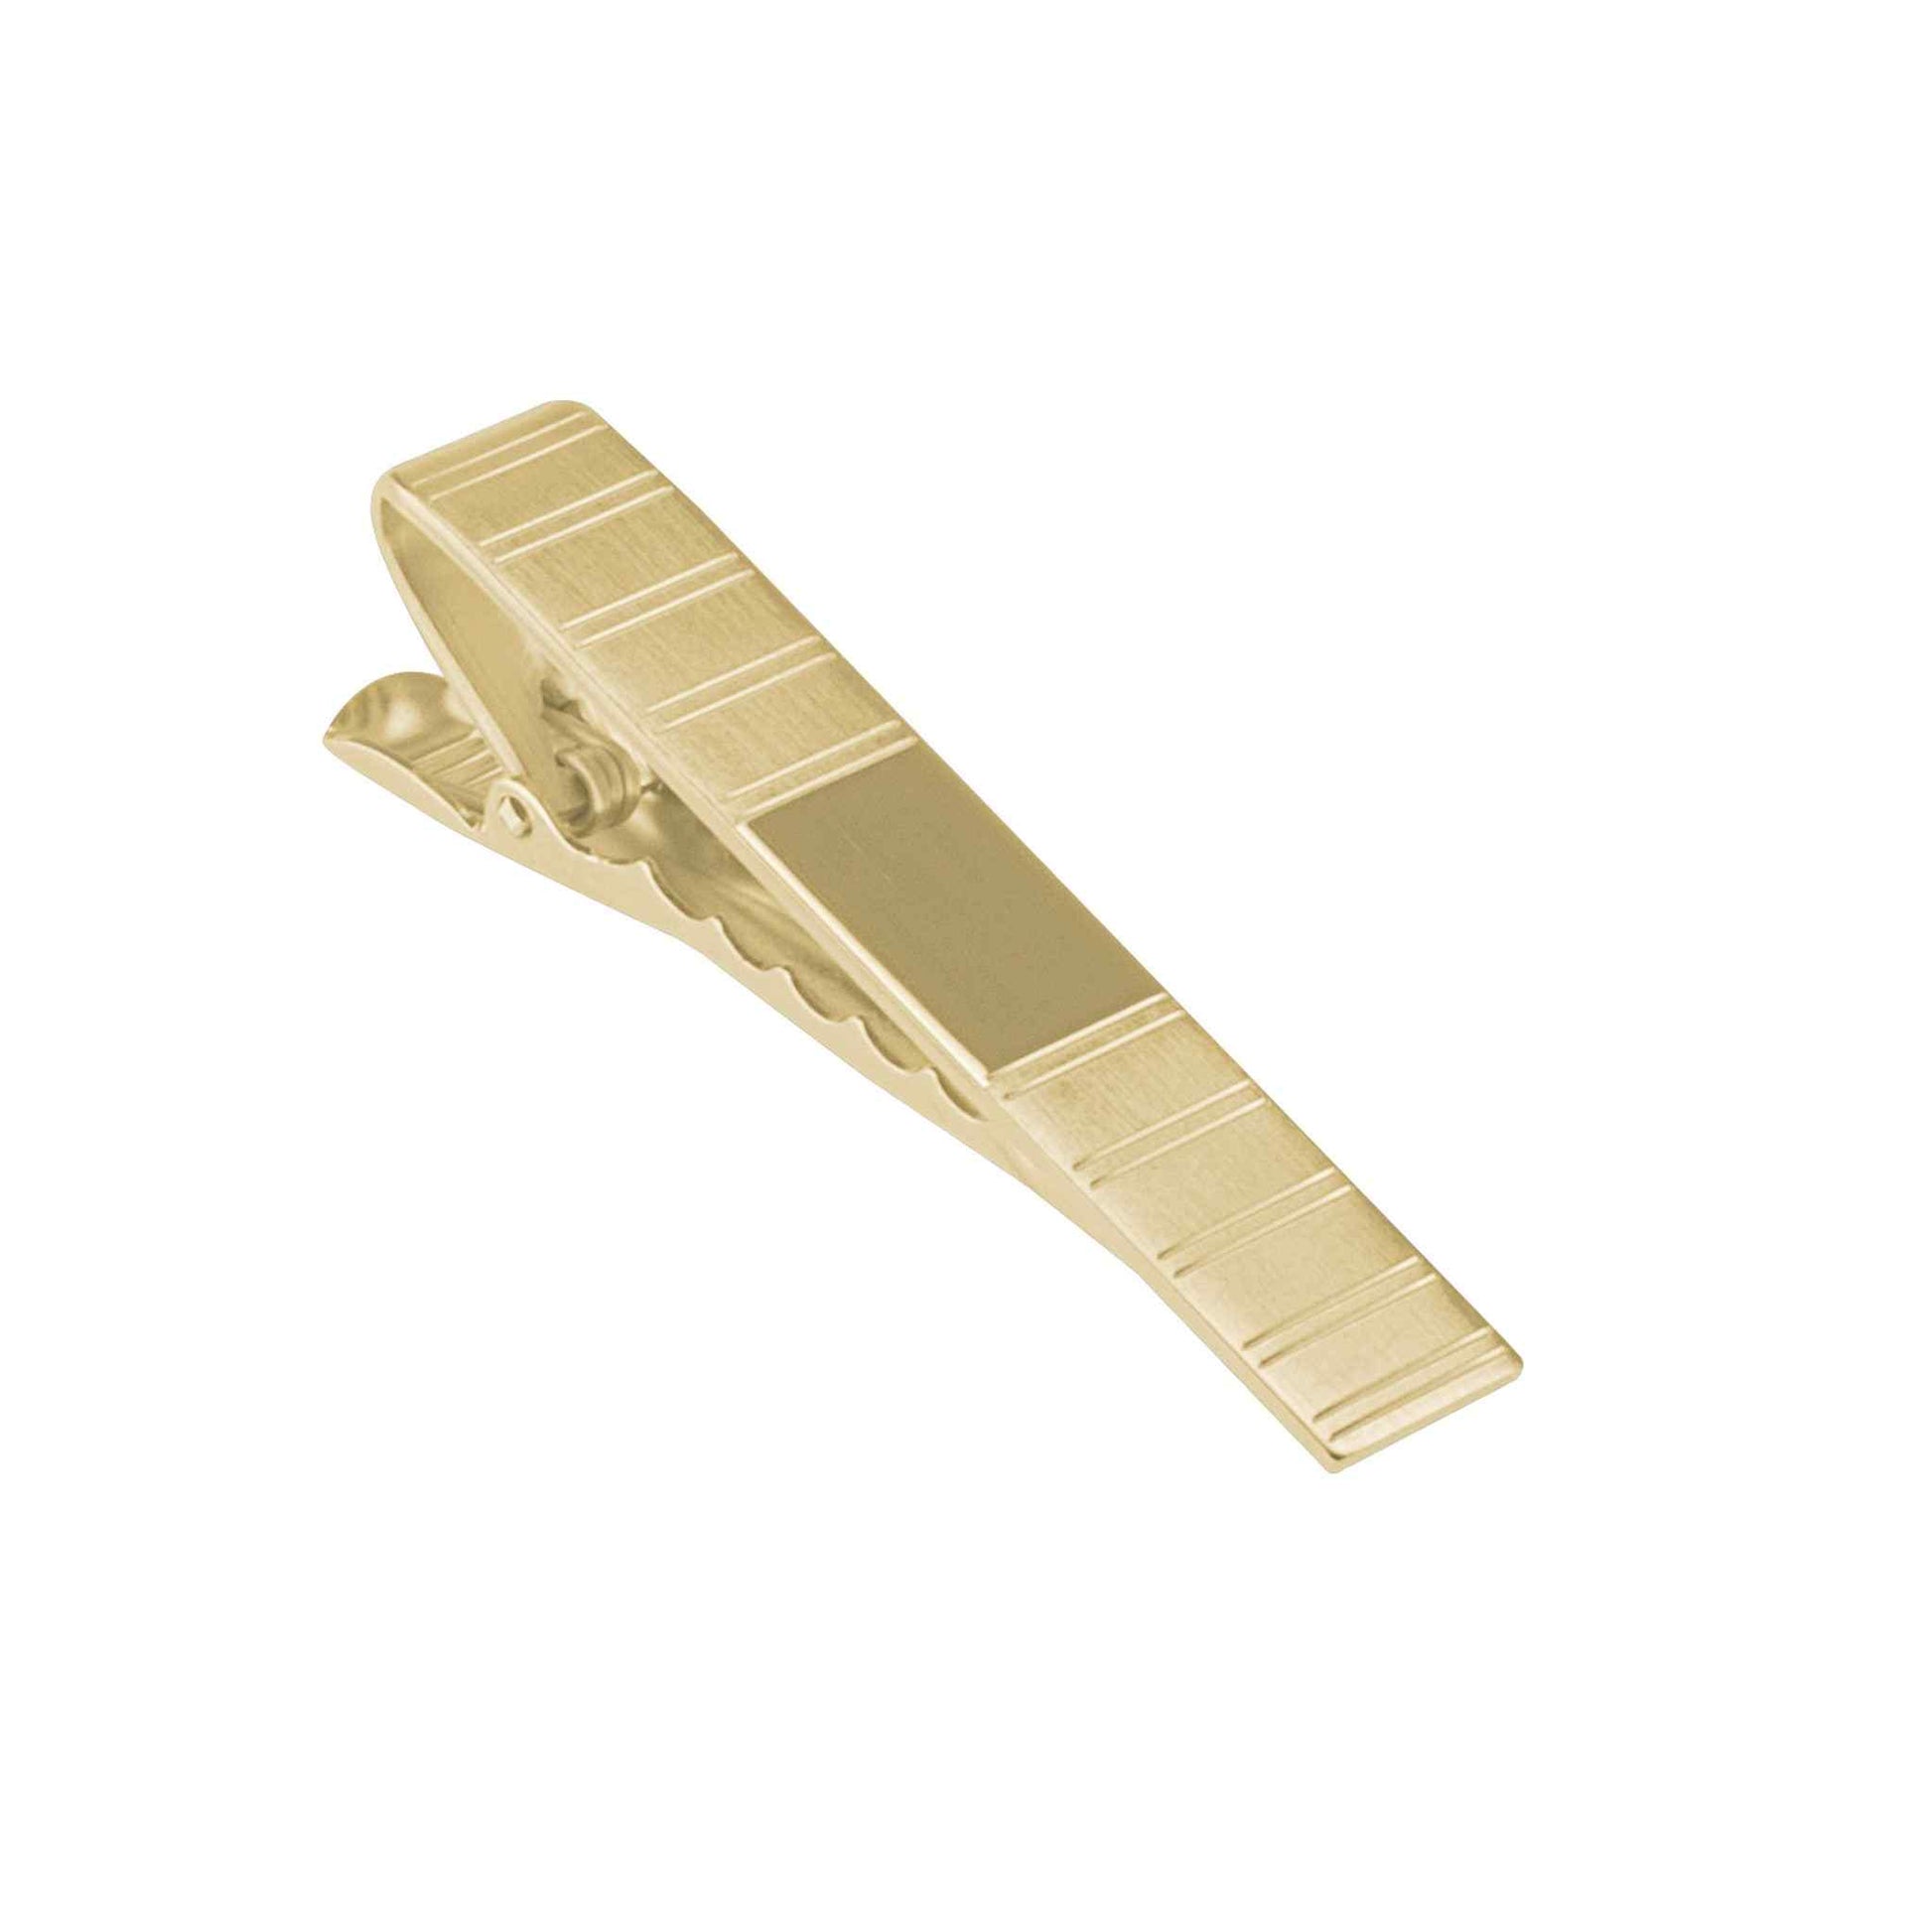 A tie bar with two tone striped pattern displayed on a neutral white background.